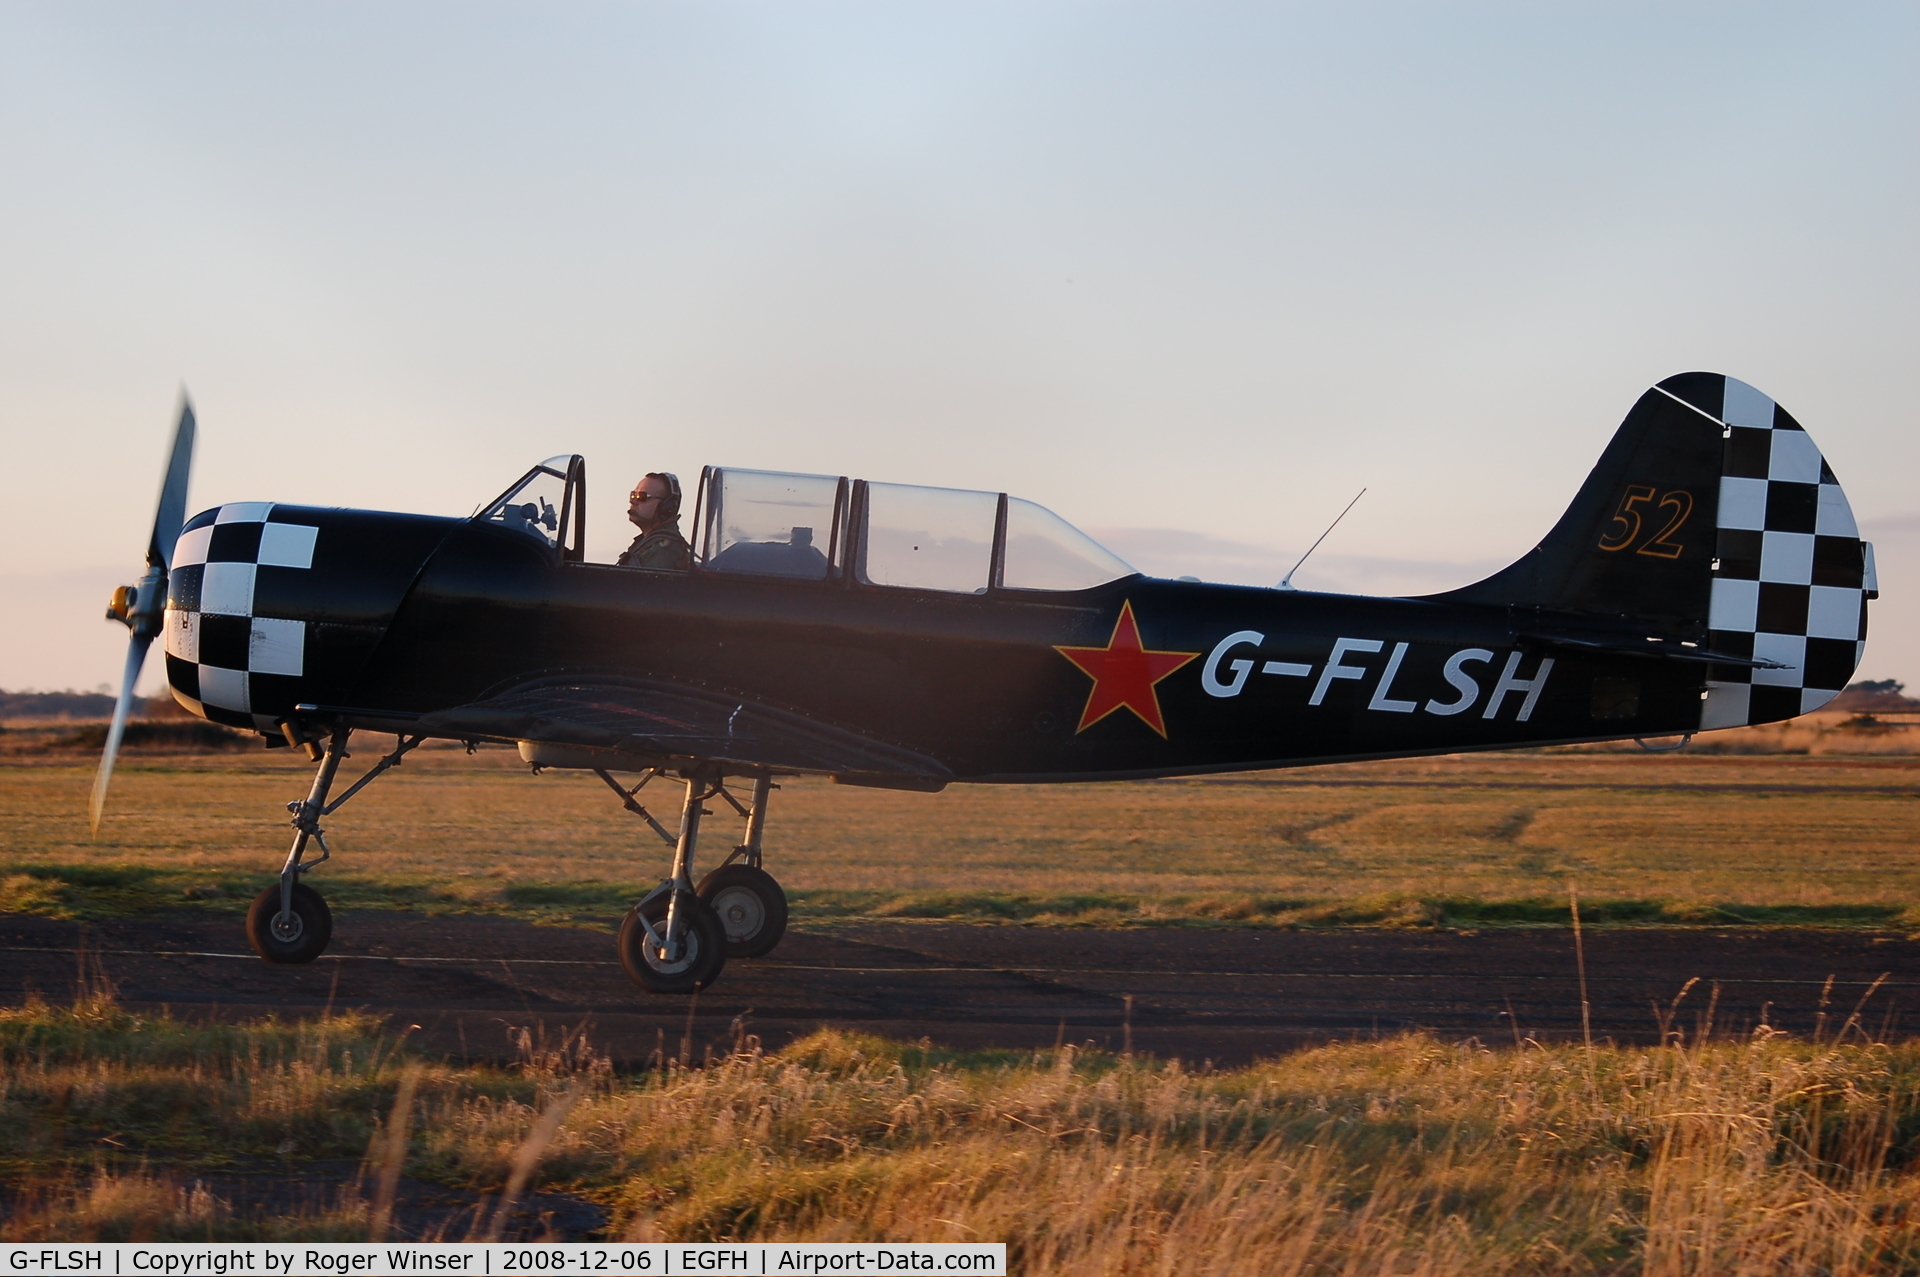 G-FLSH, 1987 Yakovlev Yak-52 C/N 877409, Visiting Swansea for formation practice with Team Osprey